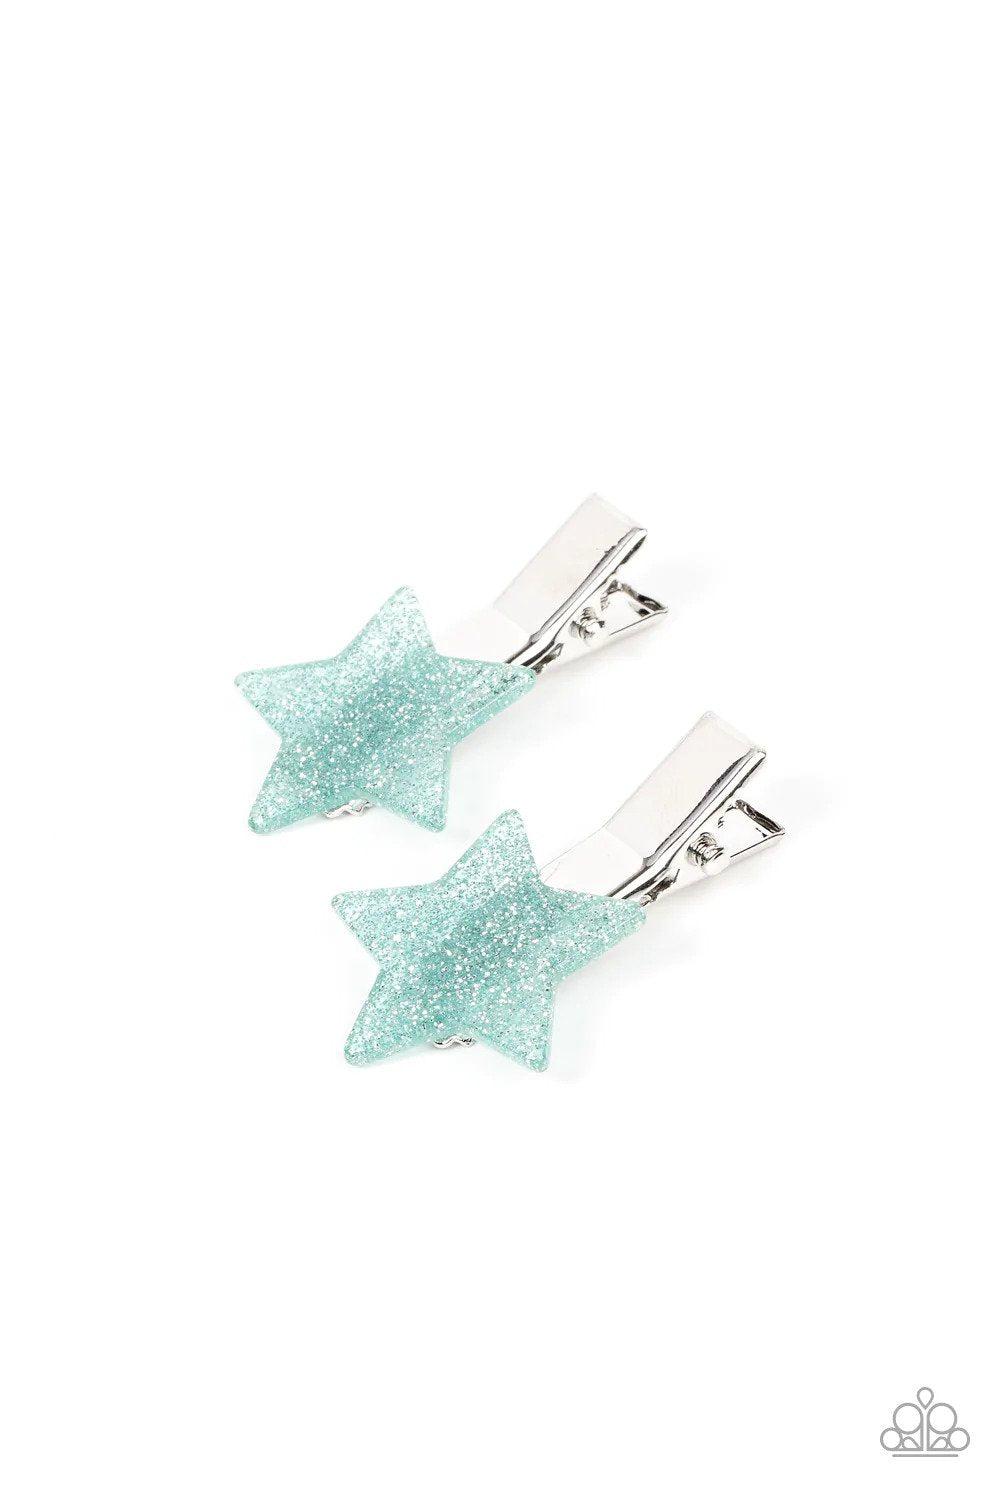 Sparkly Star Chart Blue Glitter Hair Clip - Paparazzi Accessories- lightbox - CarasShop.com - $5 Jewelry by Cara Jewels